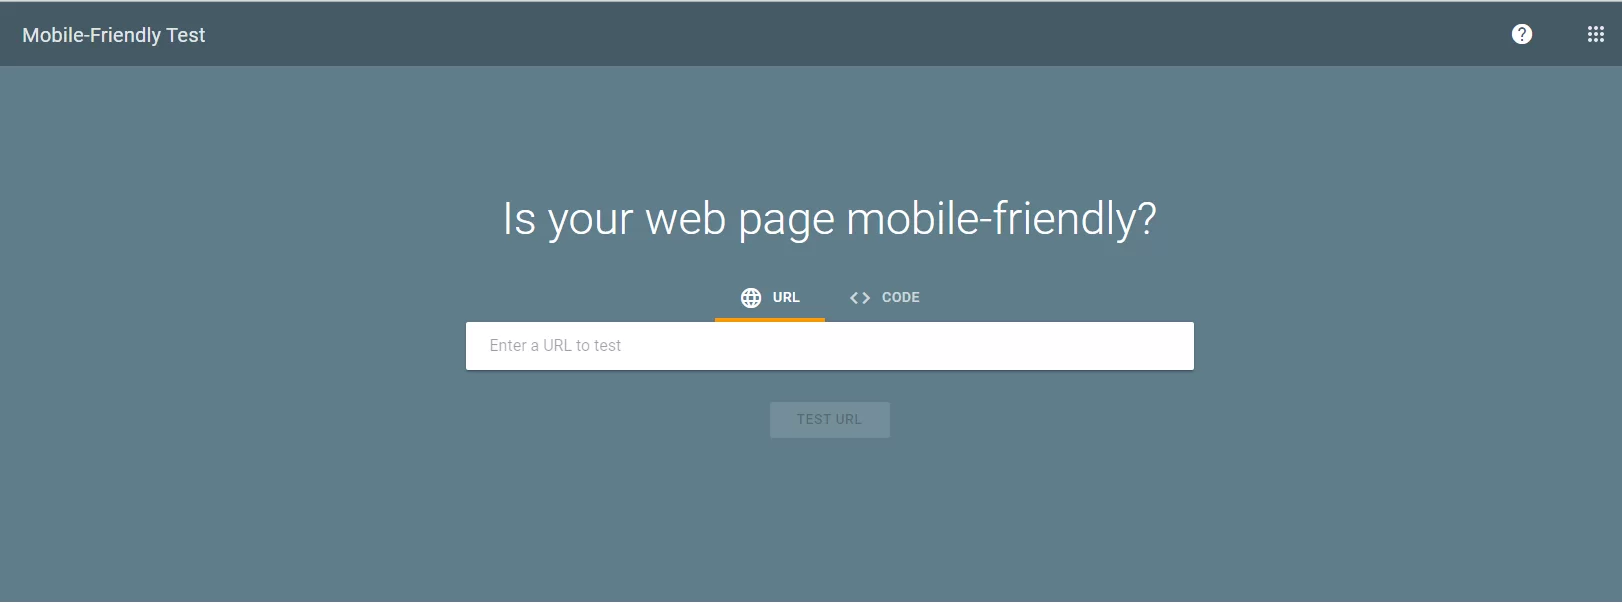 Mobile-Friendly Test Tool For Google Page Experience Signals